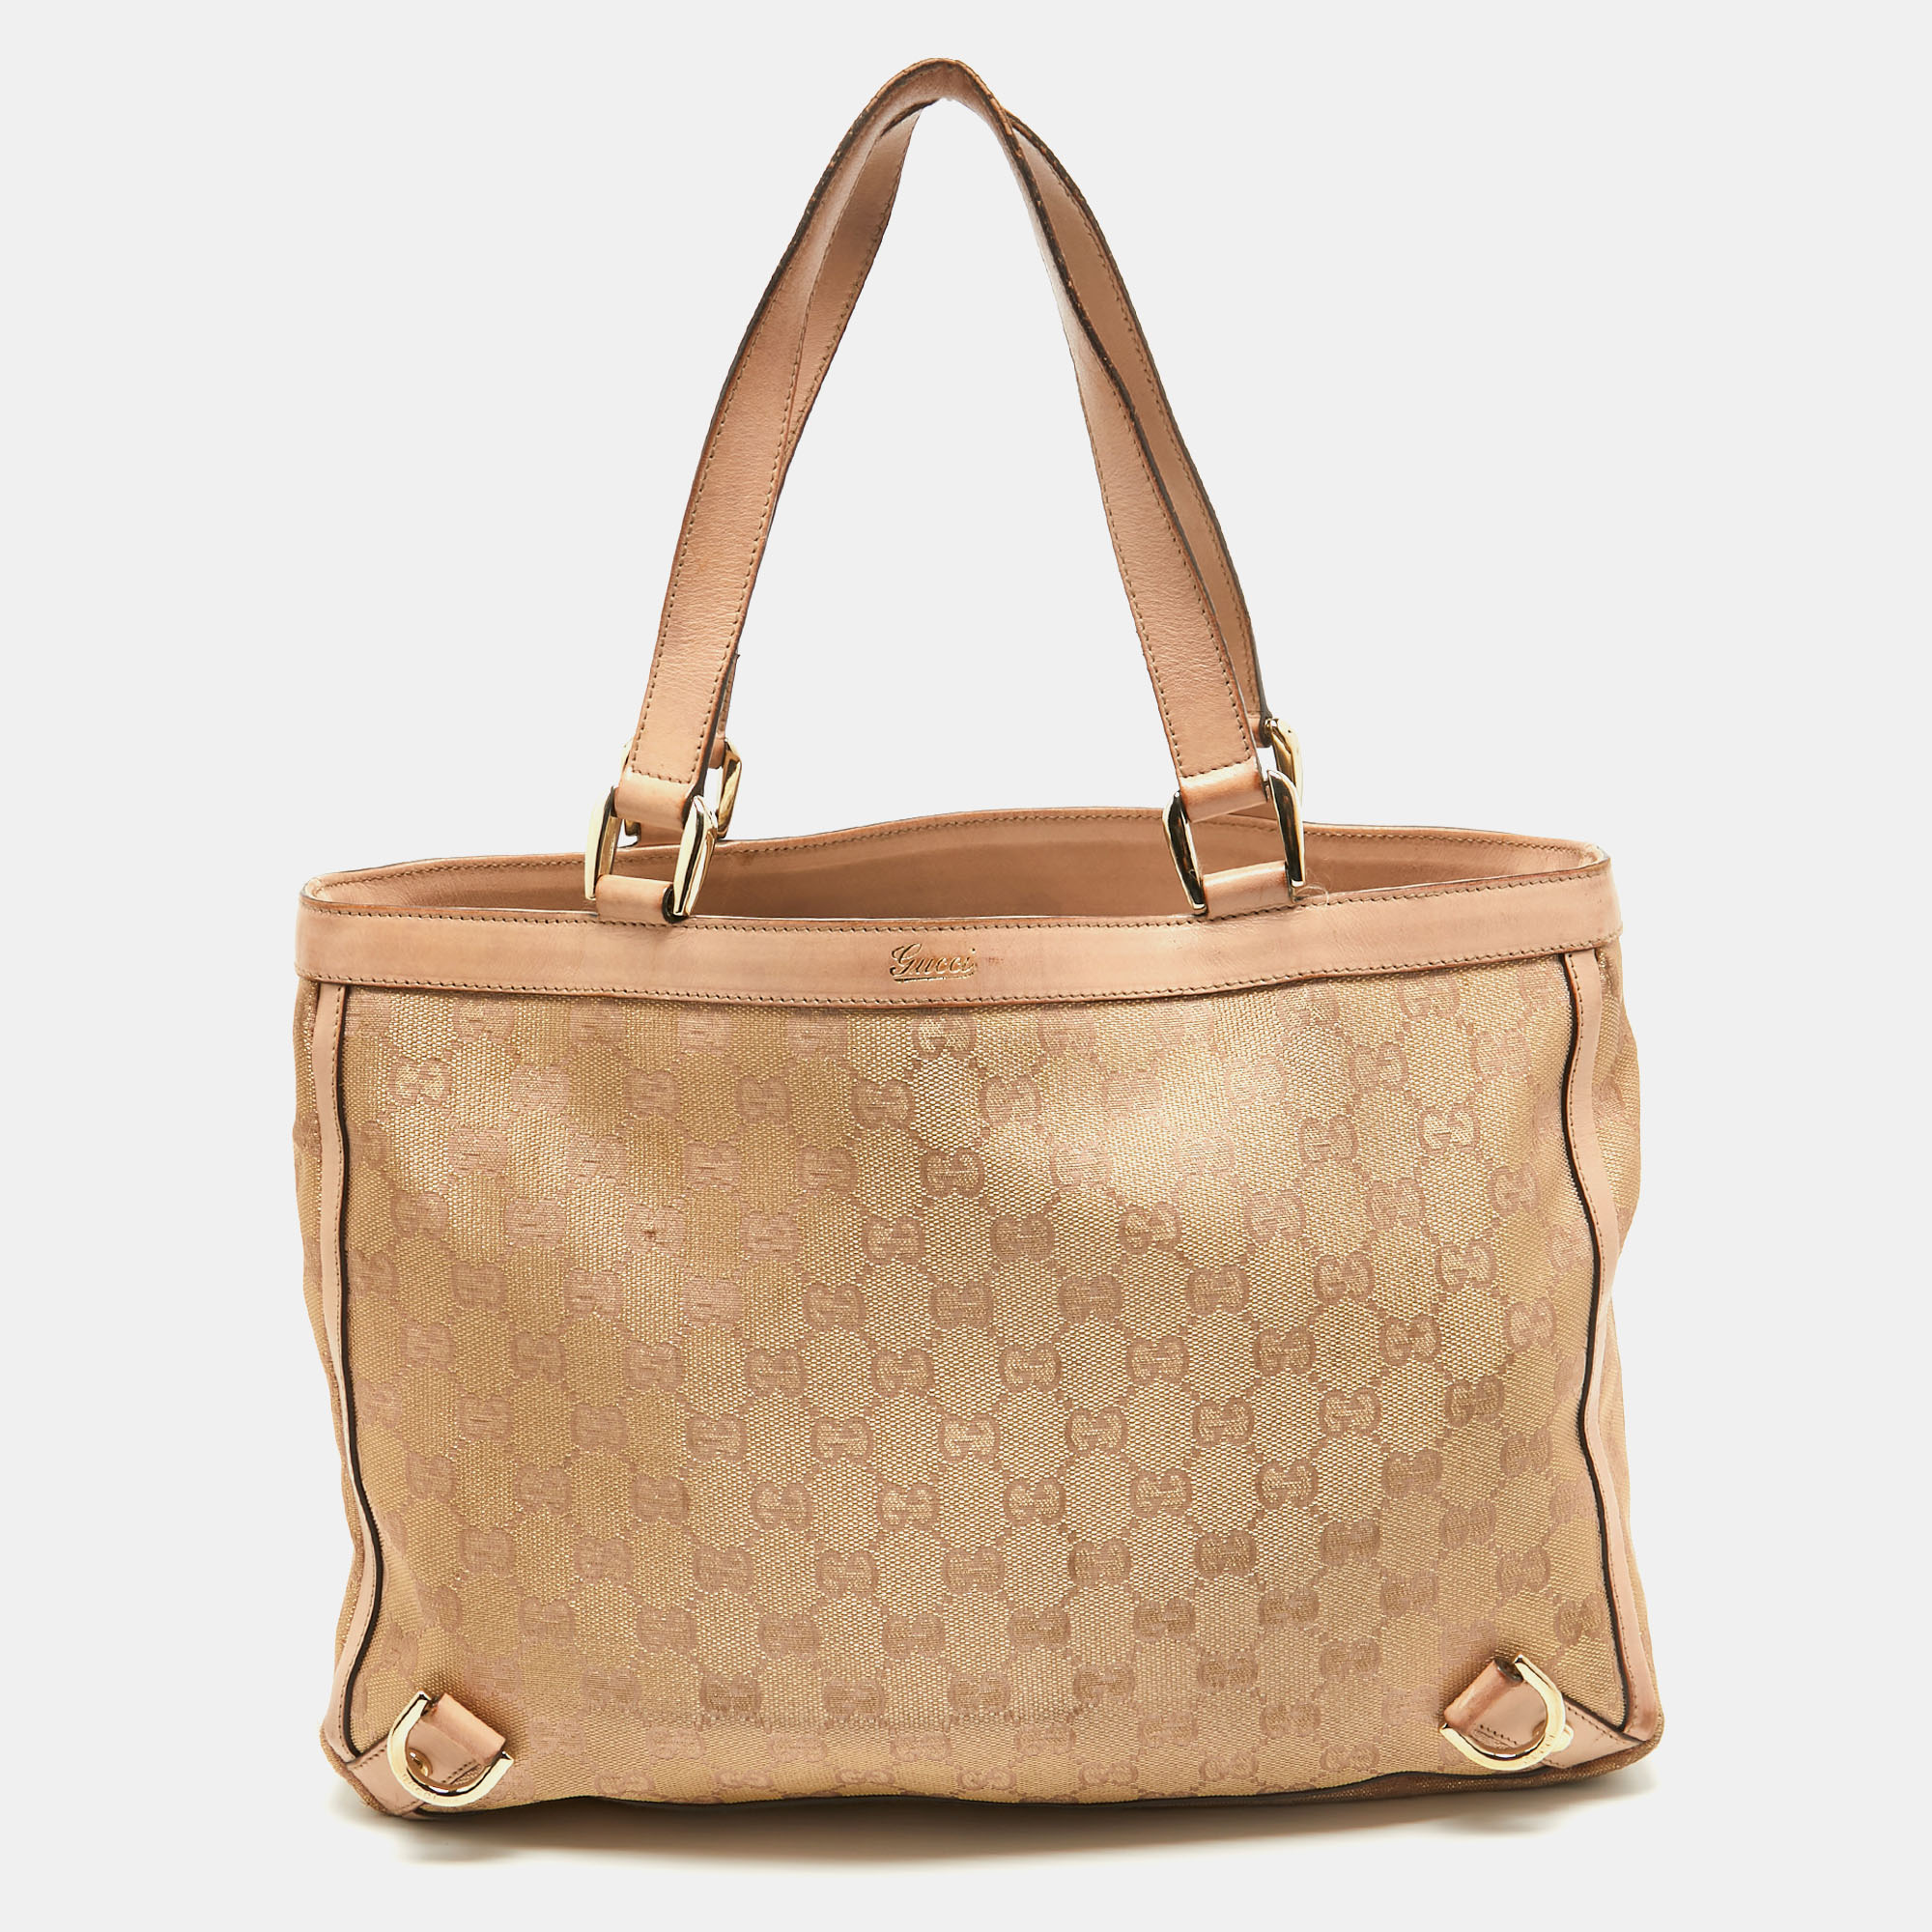 Gucci dusty pink/gold gg lurex fabric and leather tote